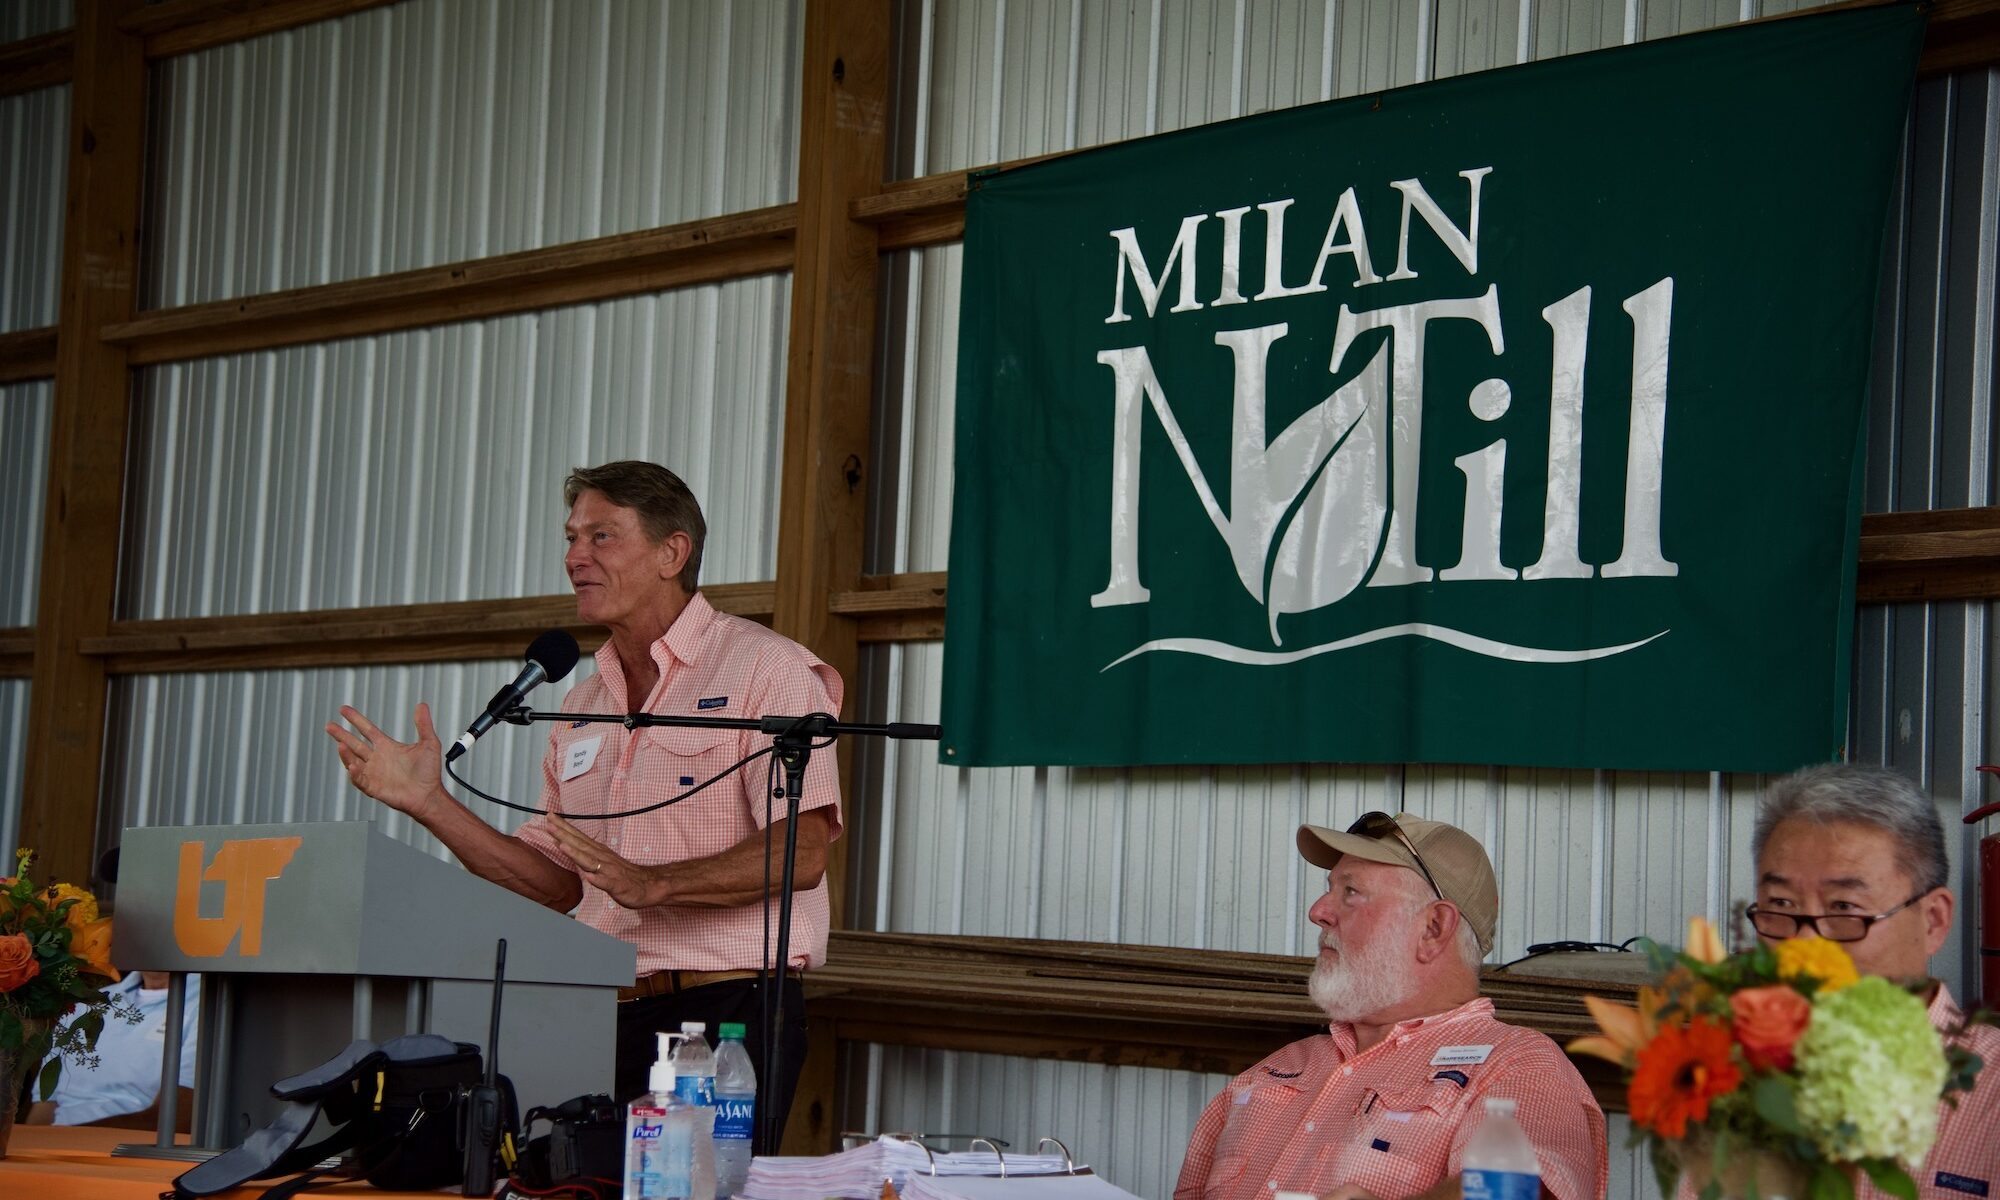 A speaker stands at a podium during Milan No-Till Field Day, a green banner that says "Milan No-Till" is positioned on the wall behind him